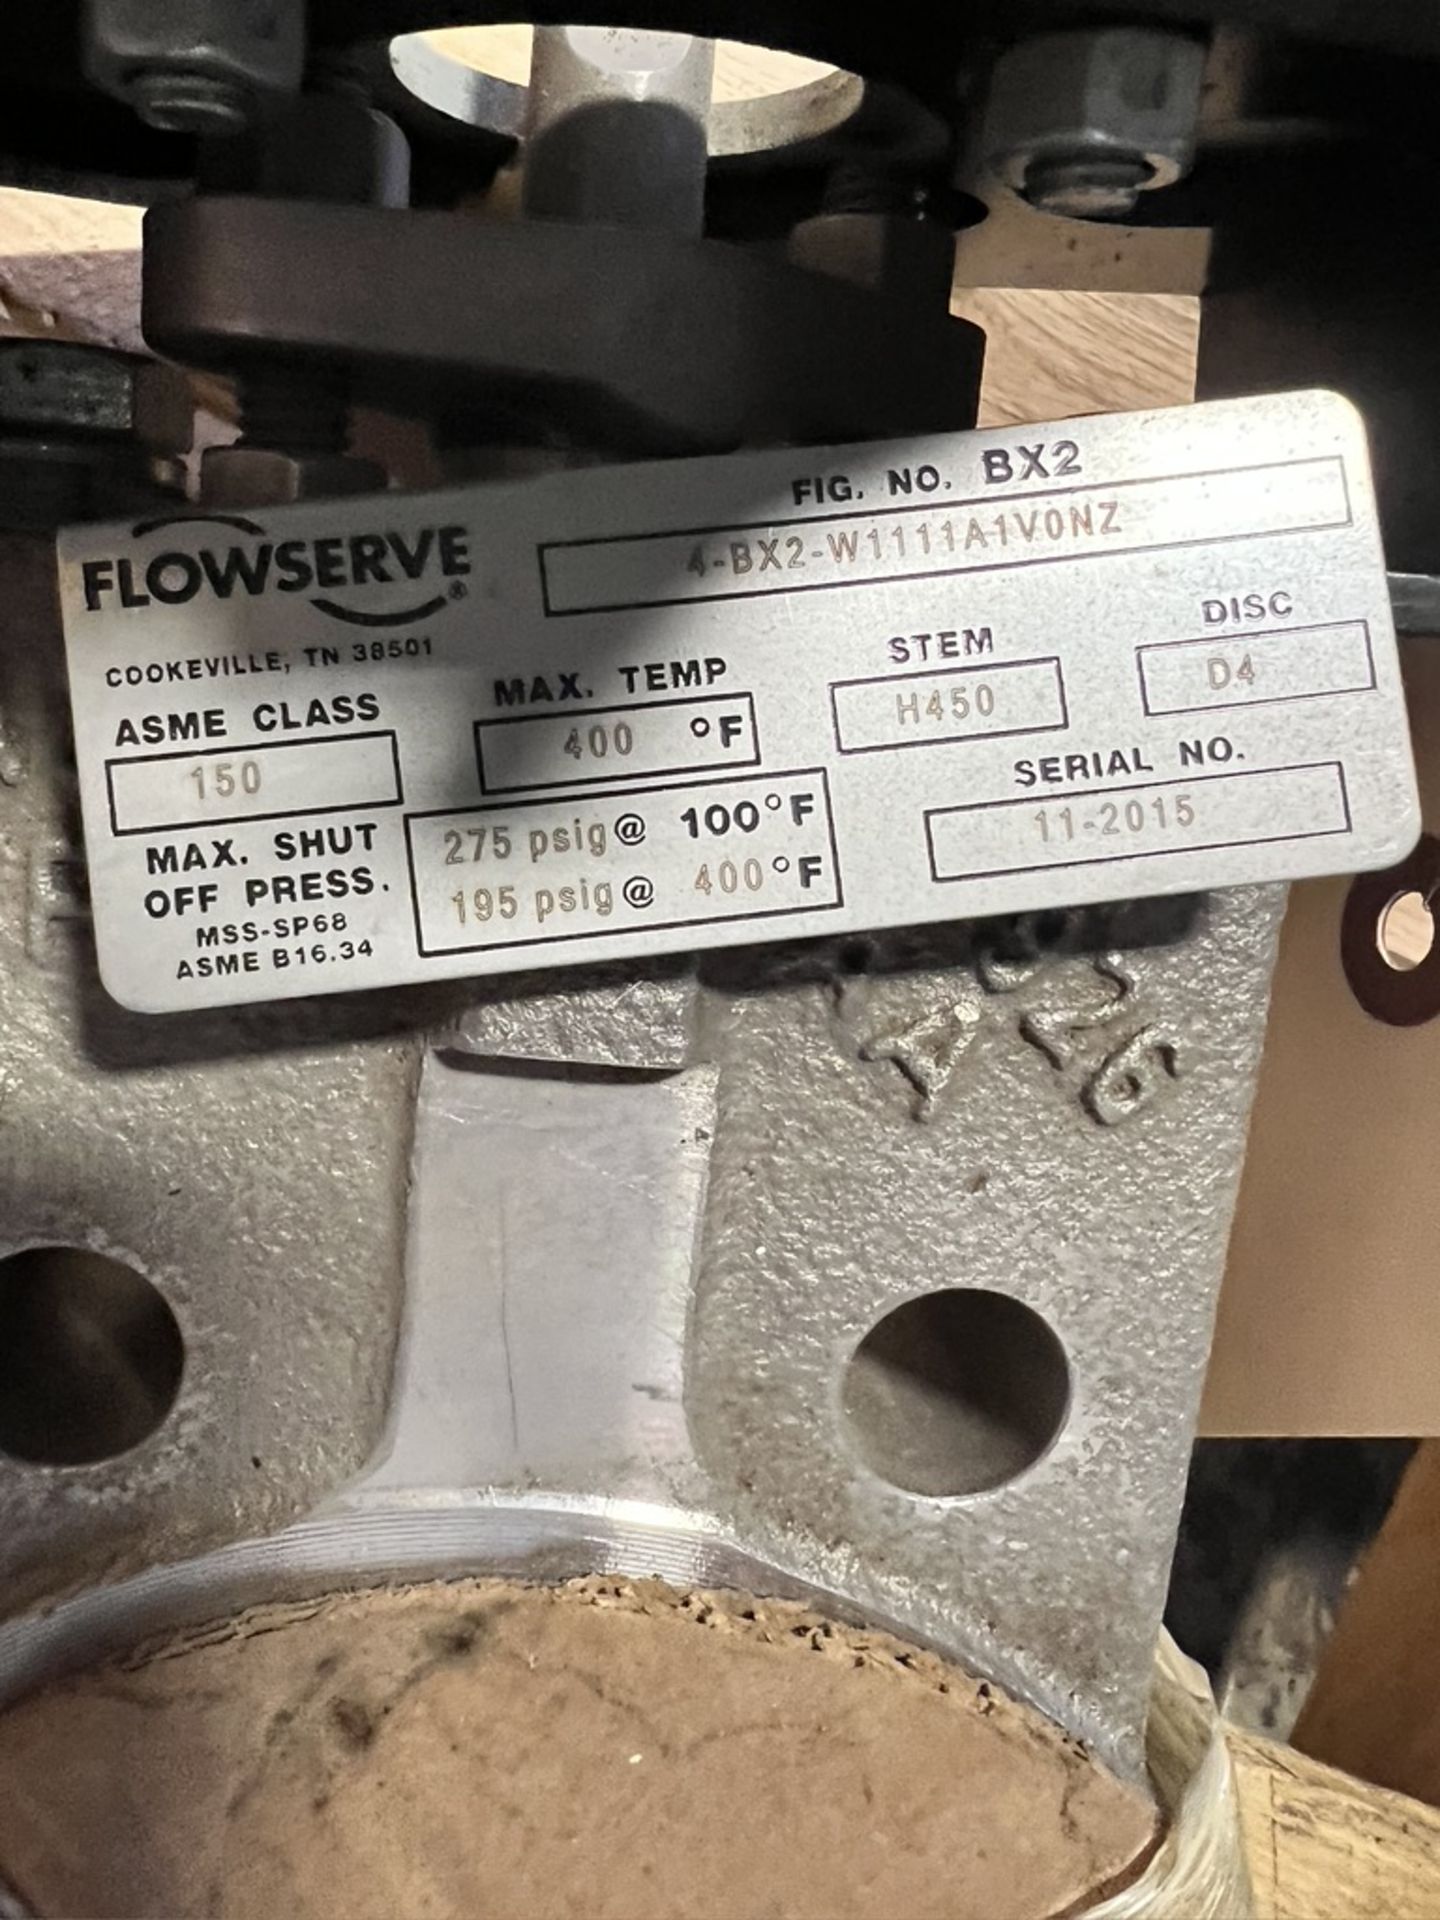 (2) NEW Kennedy Fire Main Gate Valve # KS-FW-200W, 3" Flanged(1) Flowserve Butterfly Valve 4" # 4- - Image 9 of 9